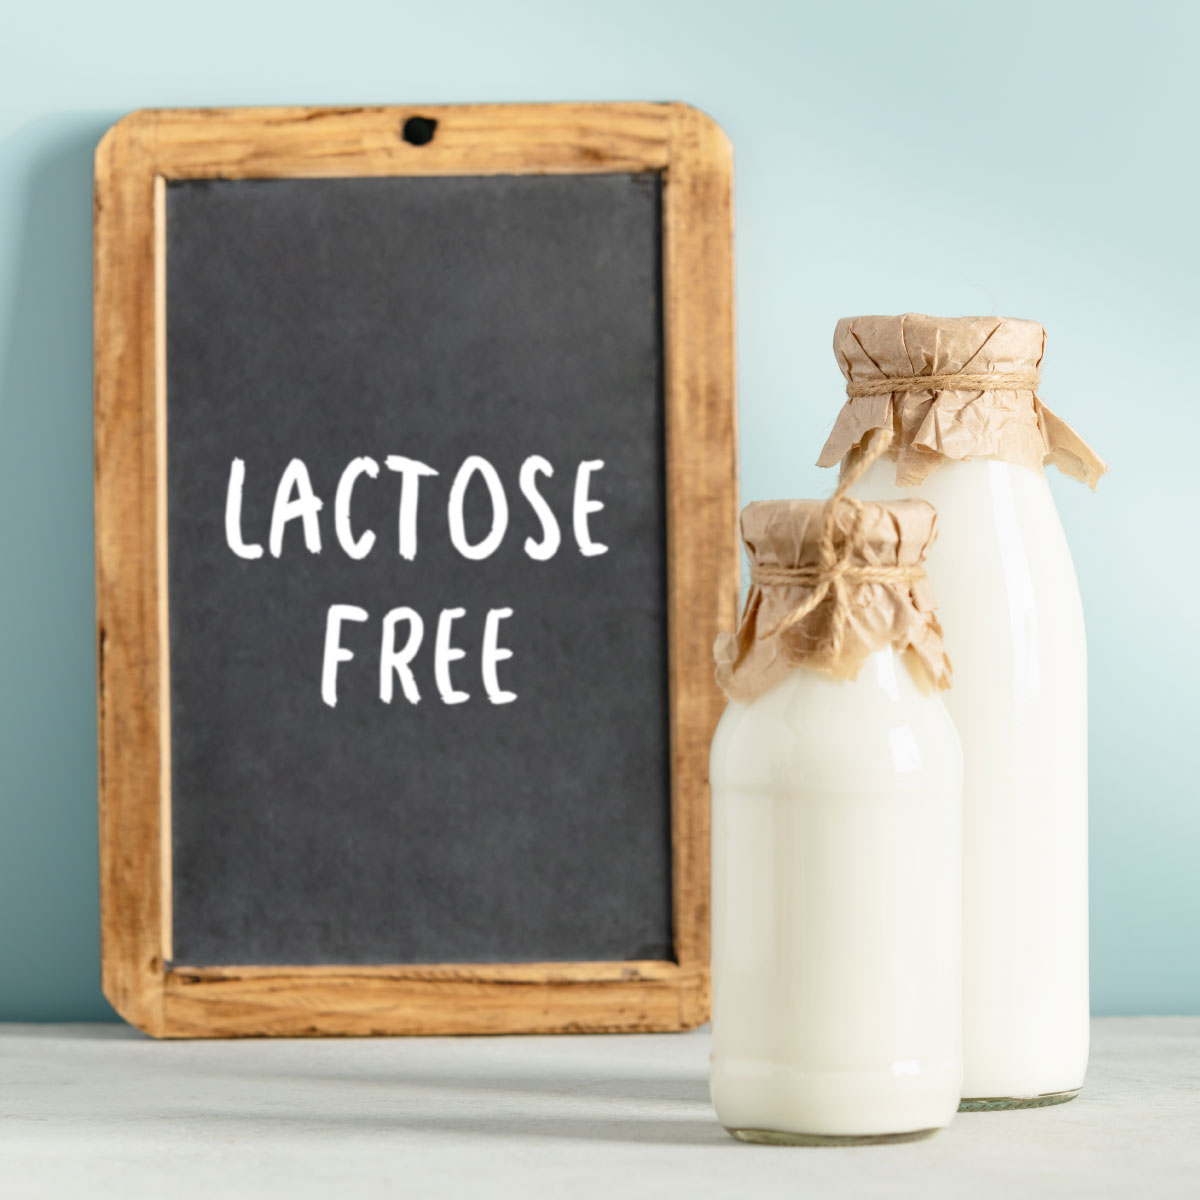 plant-based-milk-are-lactose-free